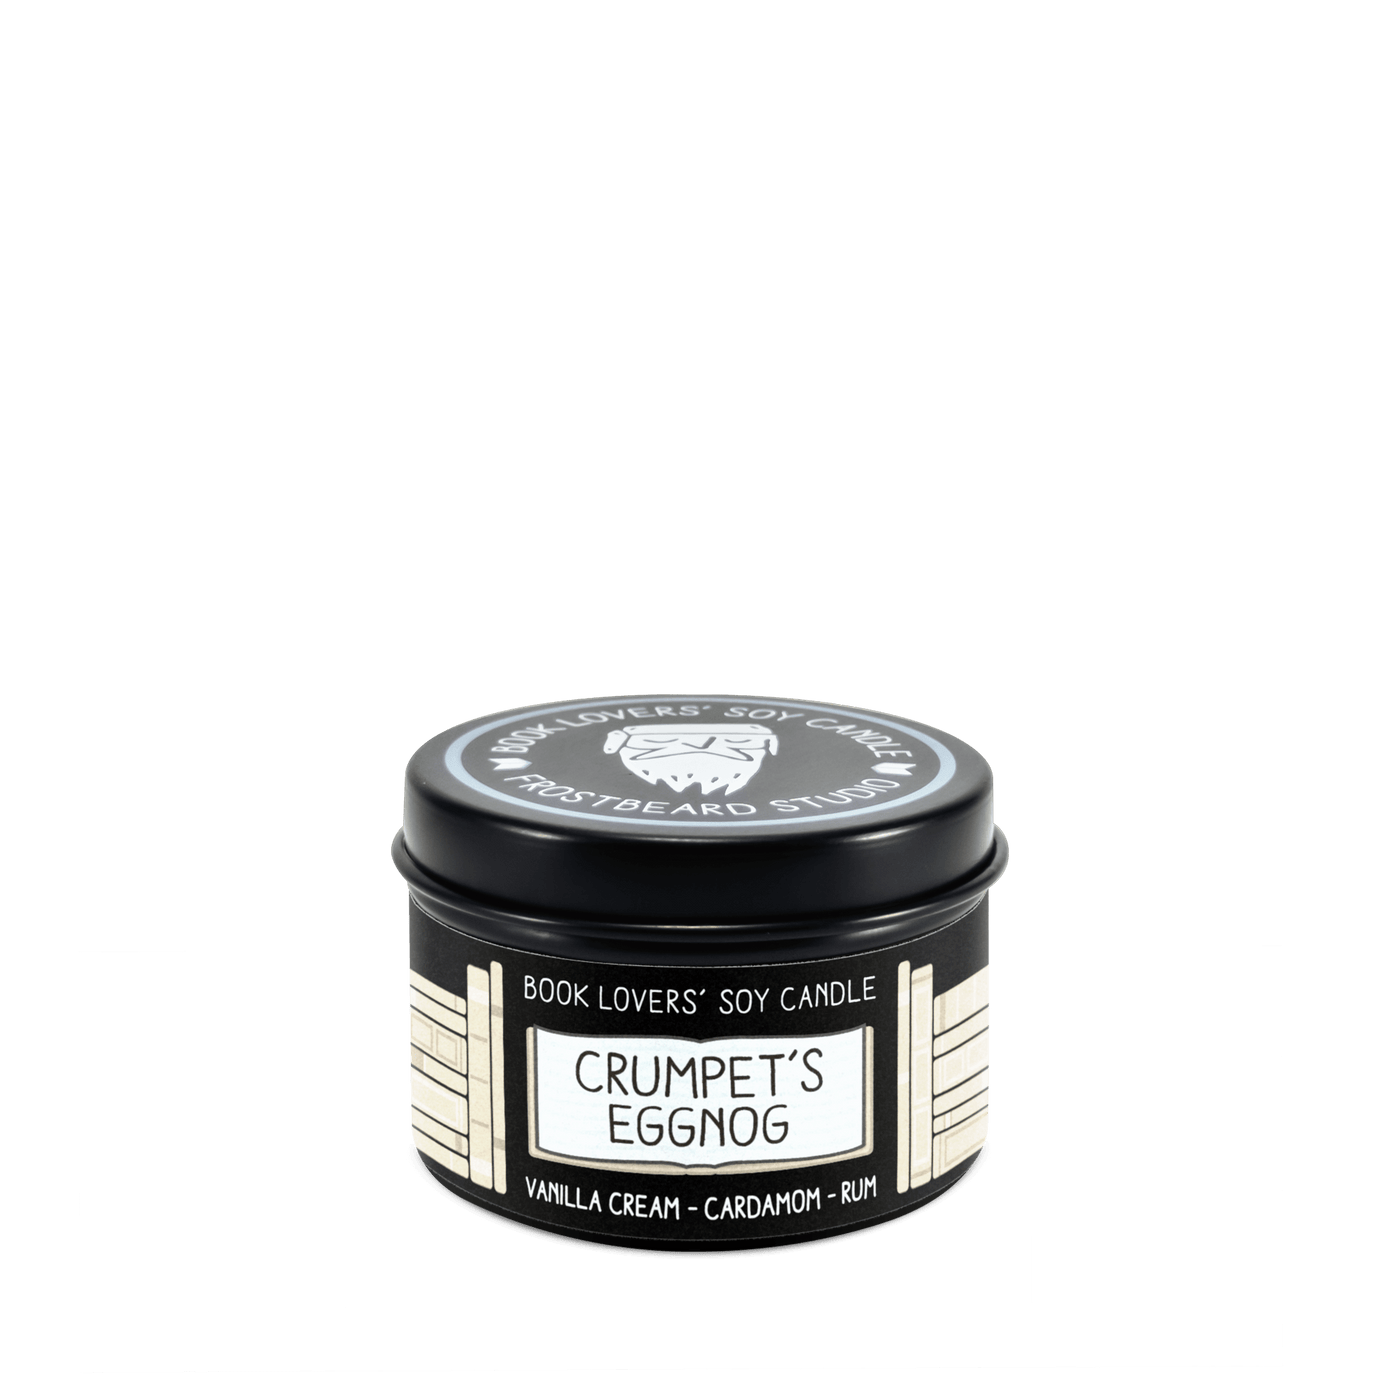 Crumpet's Eggnog  -  2 oz Tin  -  Book Lovers' Soy Candle  -  Frostbeard Studio